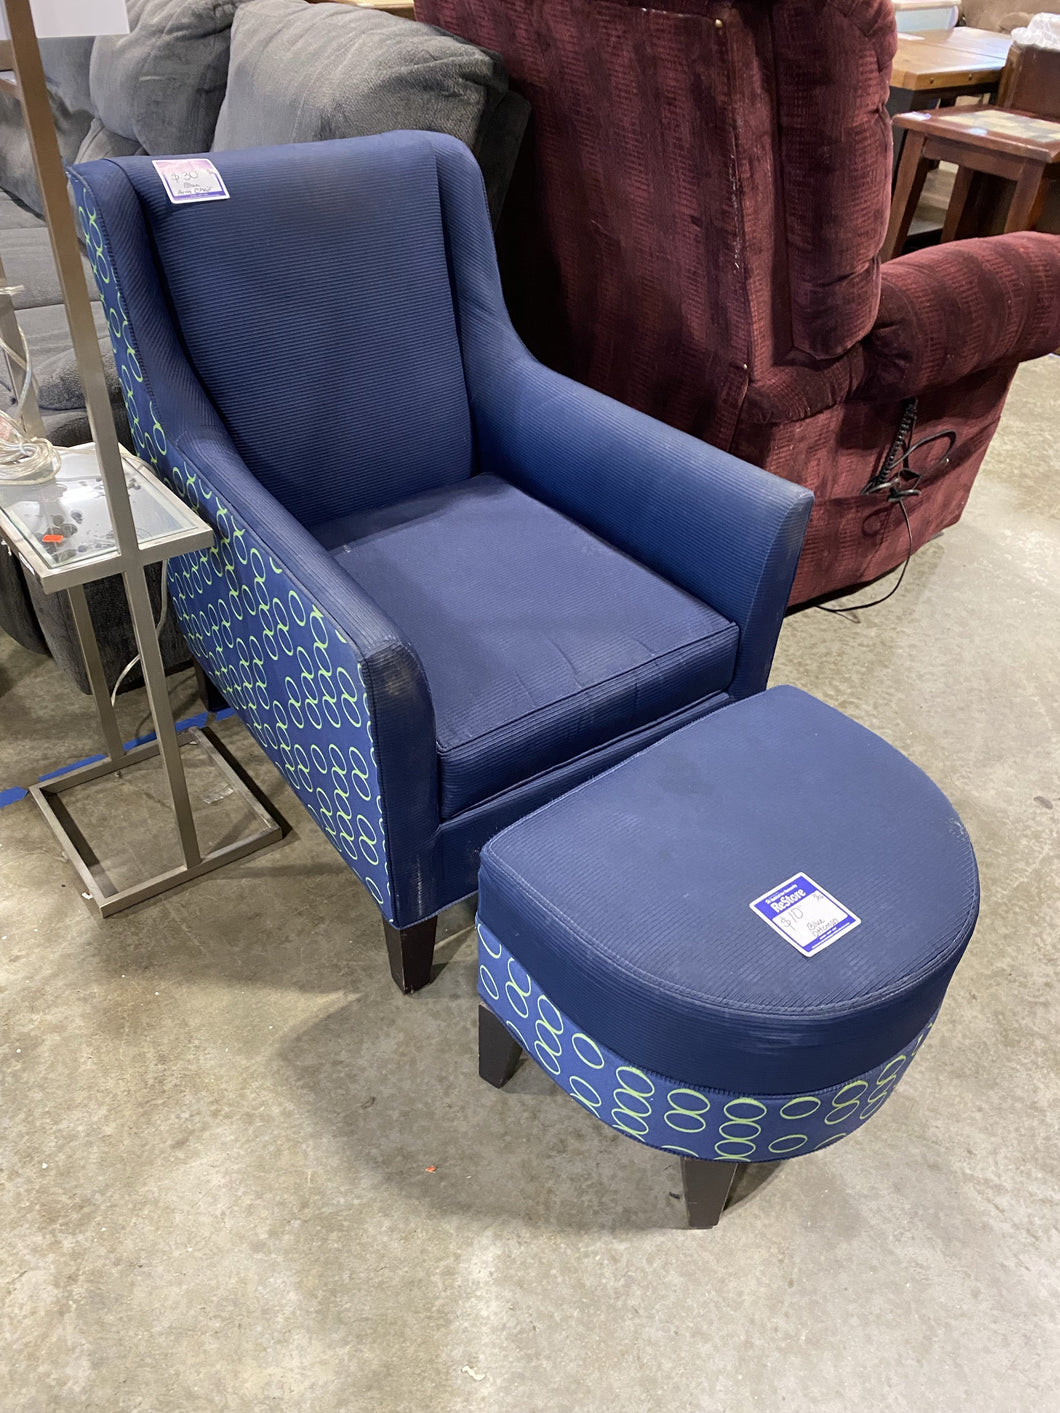 Chair and ottoman set - Kenner Habitat for Humanity ReStore